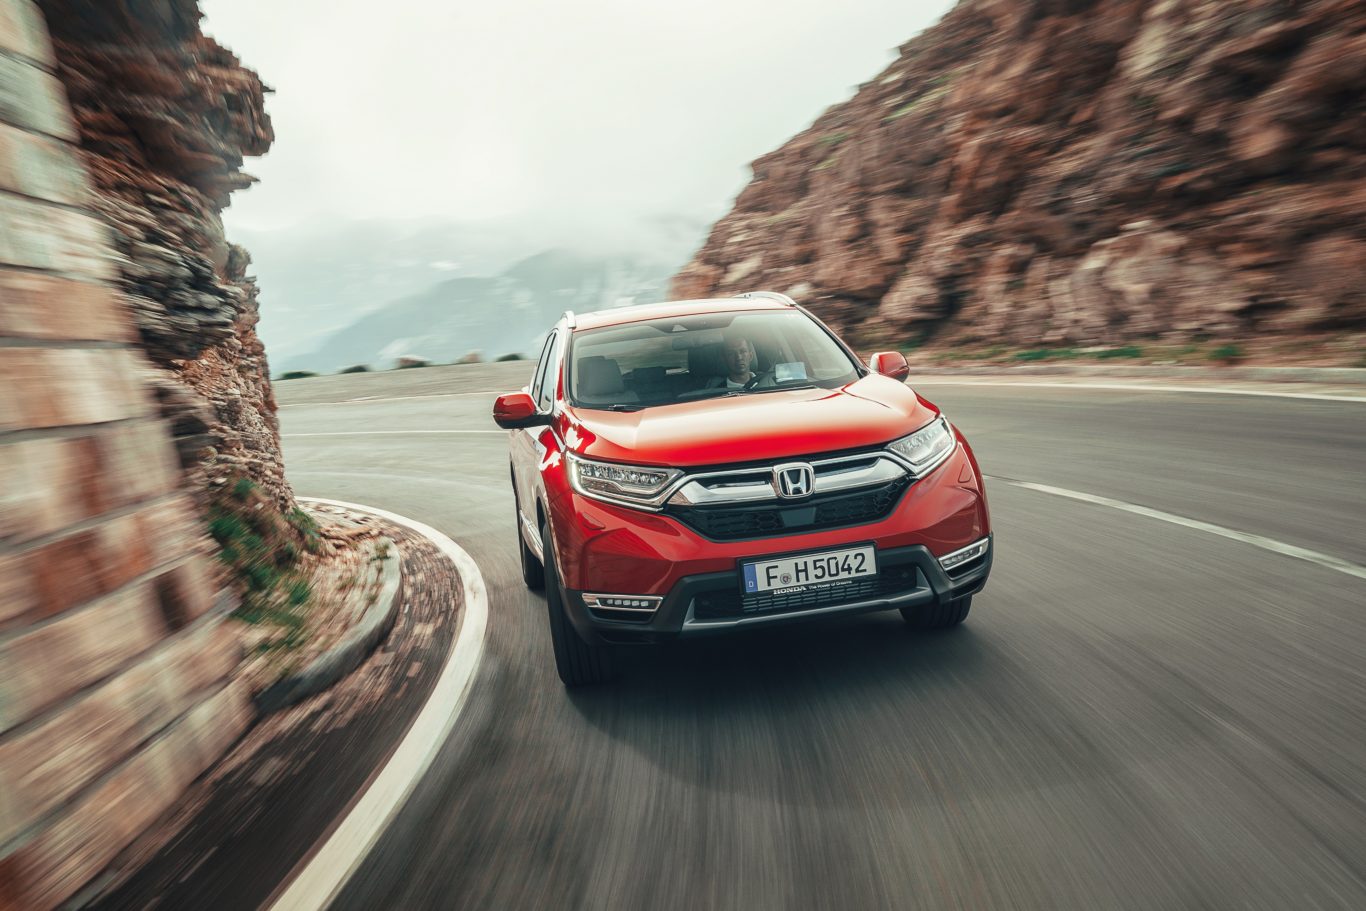 The CR-V copes well with lumps and bumps in the road